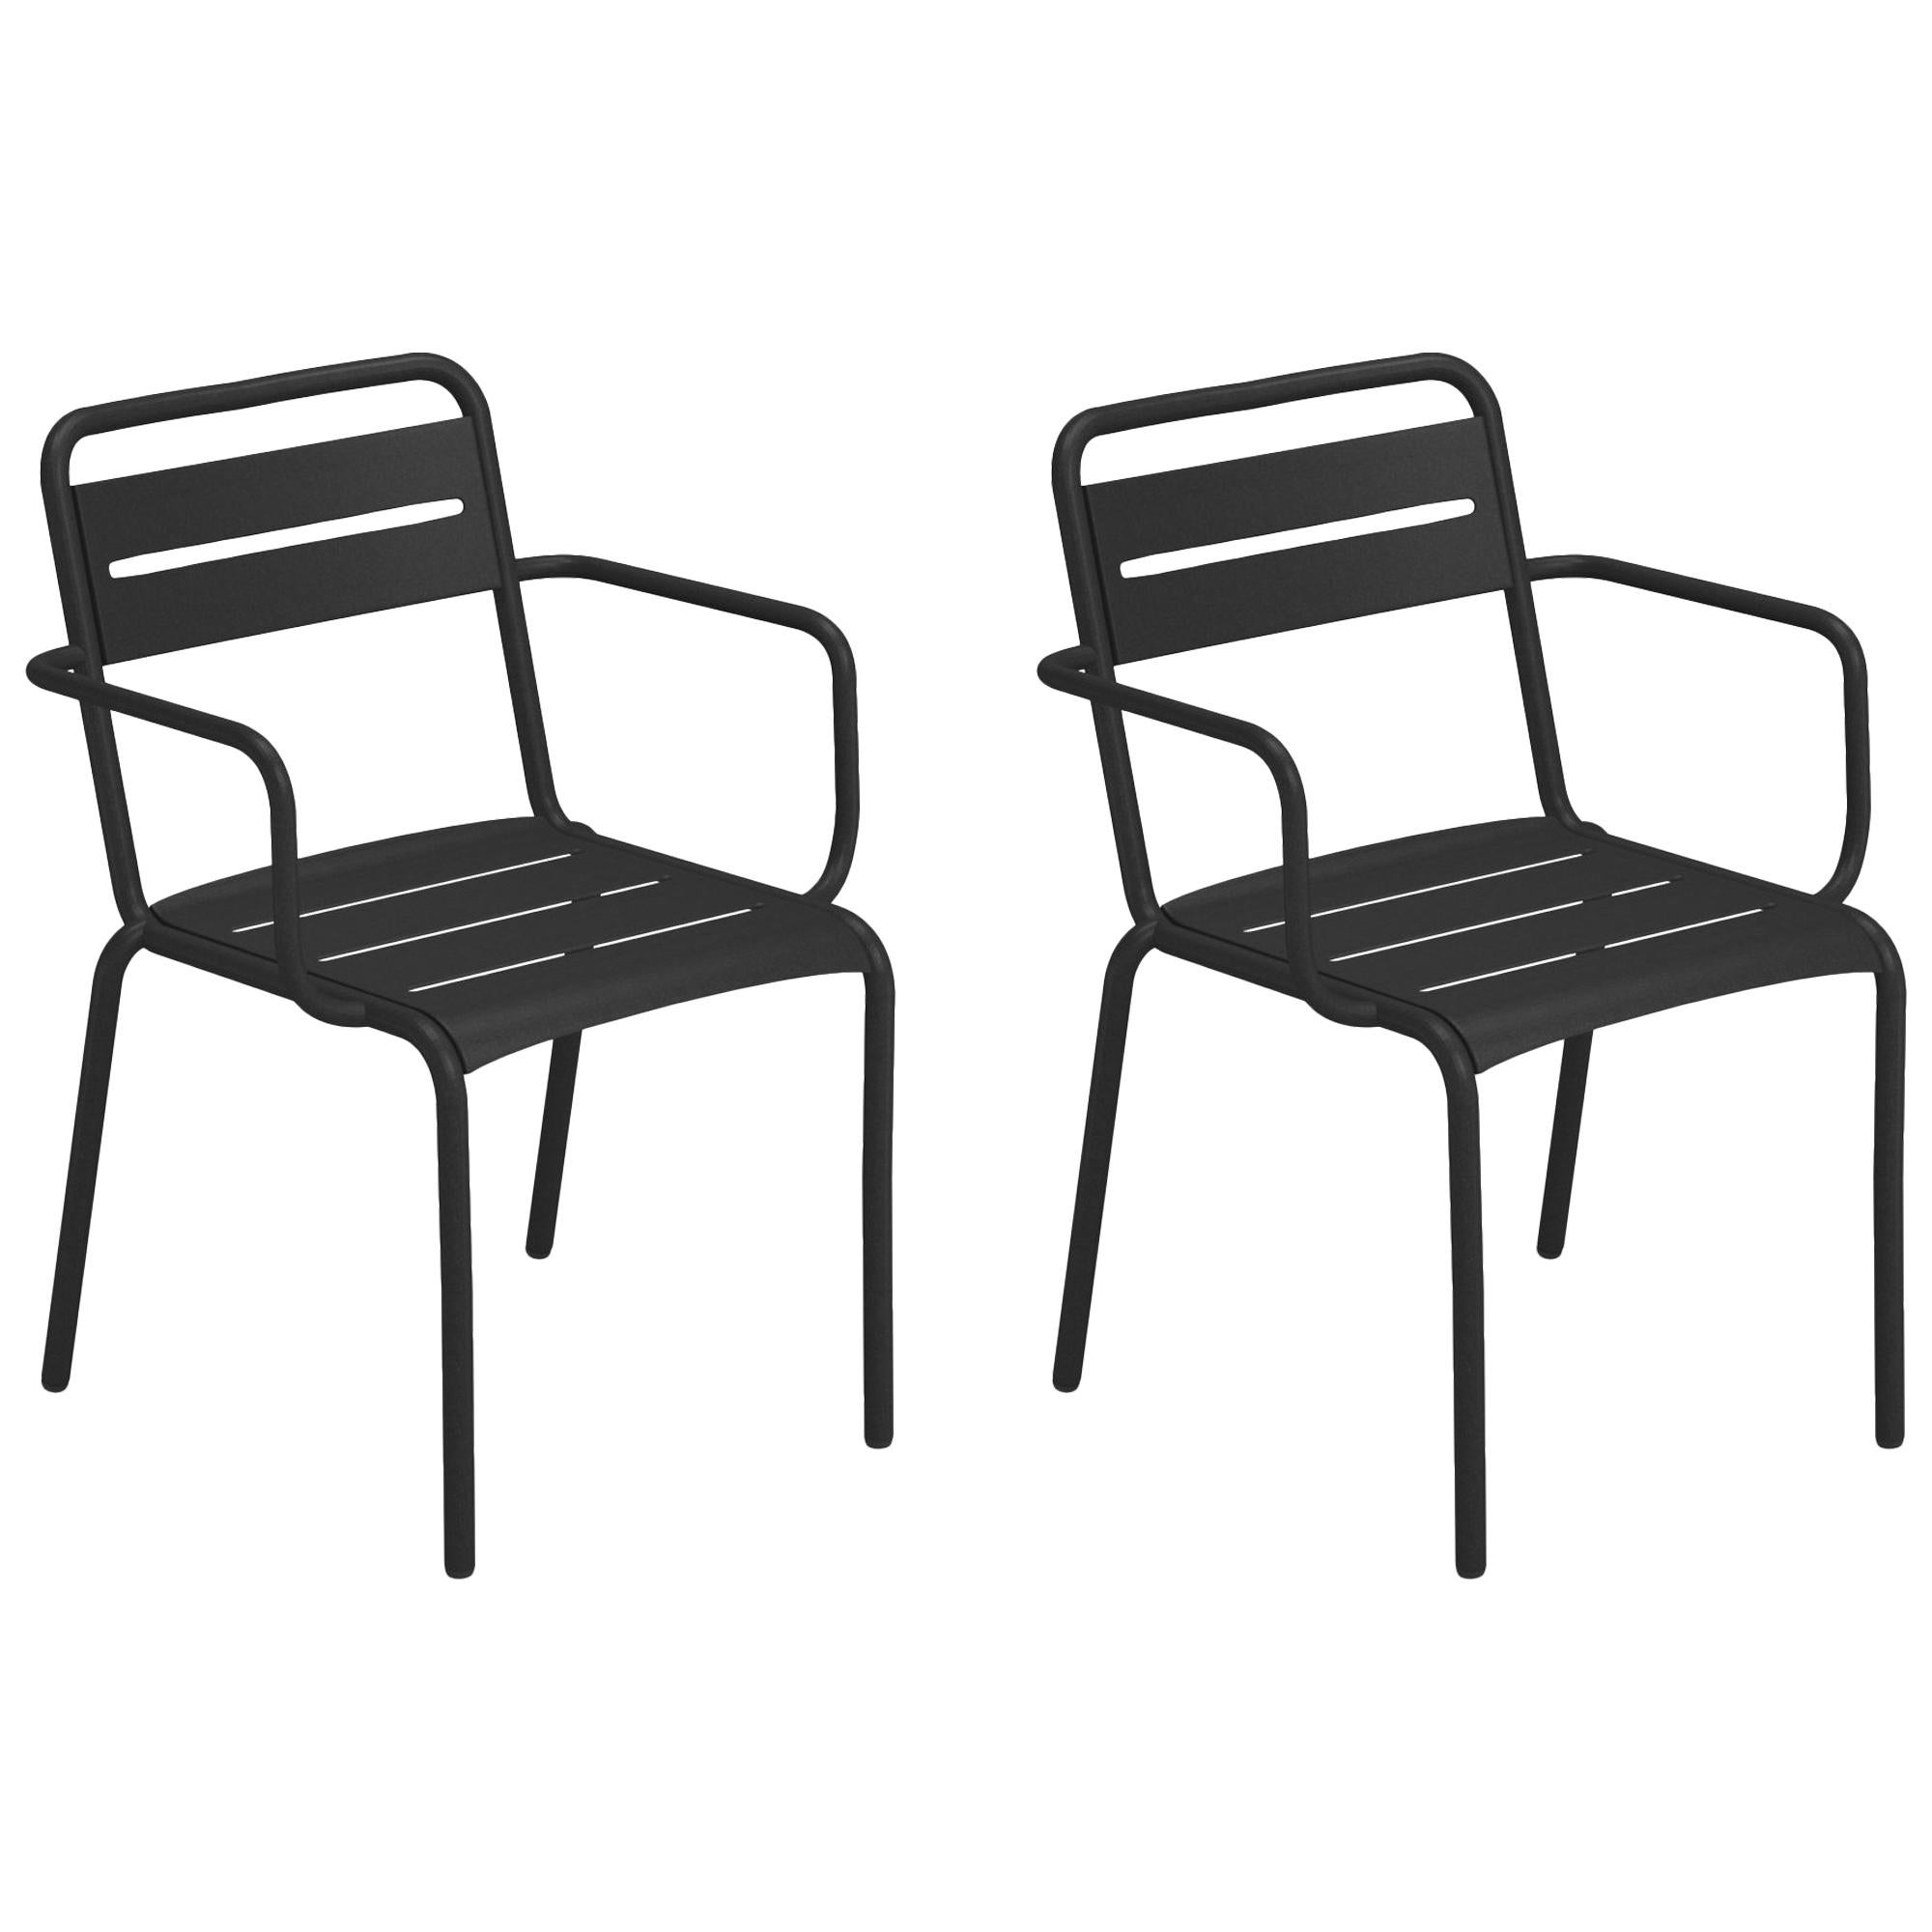 Steel EMU Star Armchair - Set of 2 items For Sale